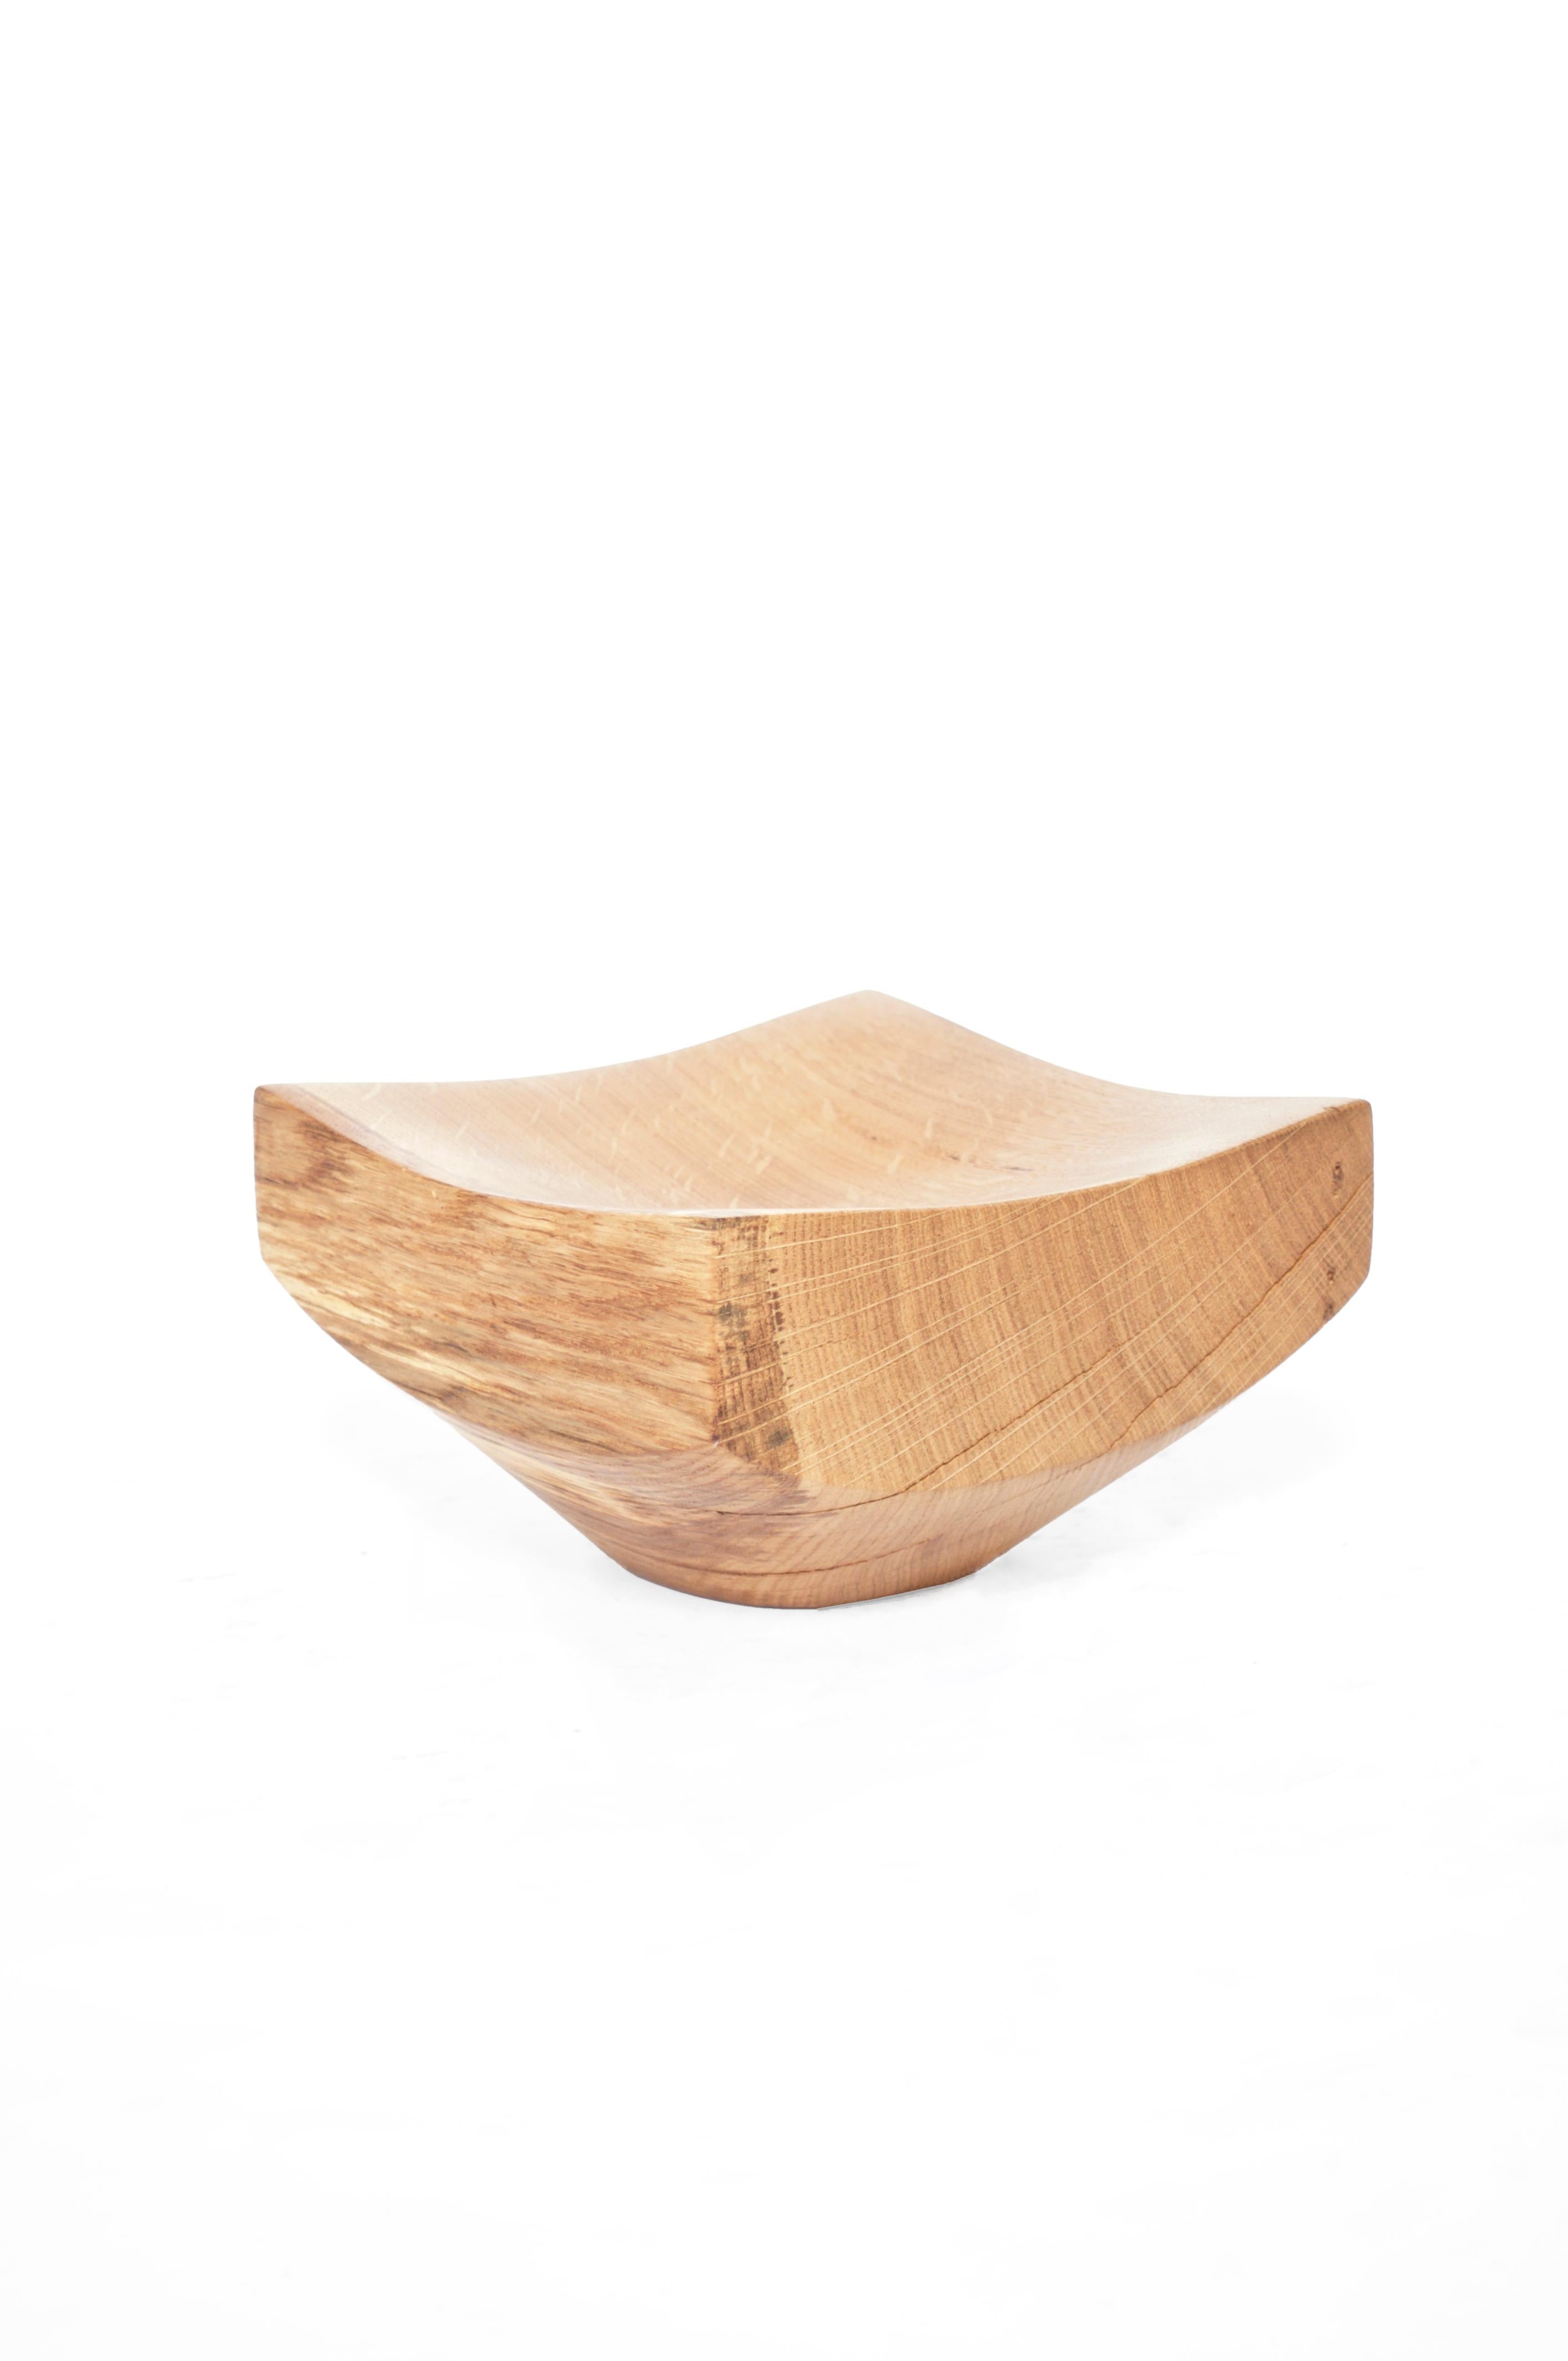 Large oak vessel 2801 by Jörg Pietschmann
Dimensions: D 18 x W 20 x H 11 cm 
Materials: oak. 
Finish: polished oil finish.
Also available in small. 


In Pietschmann’s sculptures, trees that for centuries were part of a landscape and founded